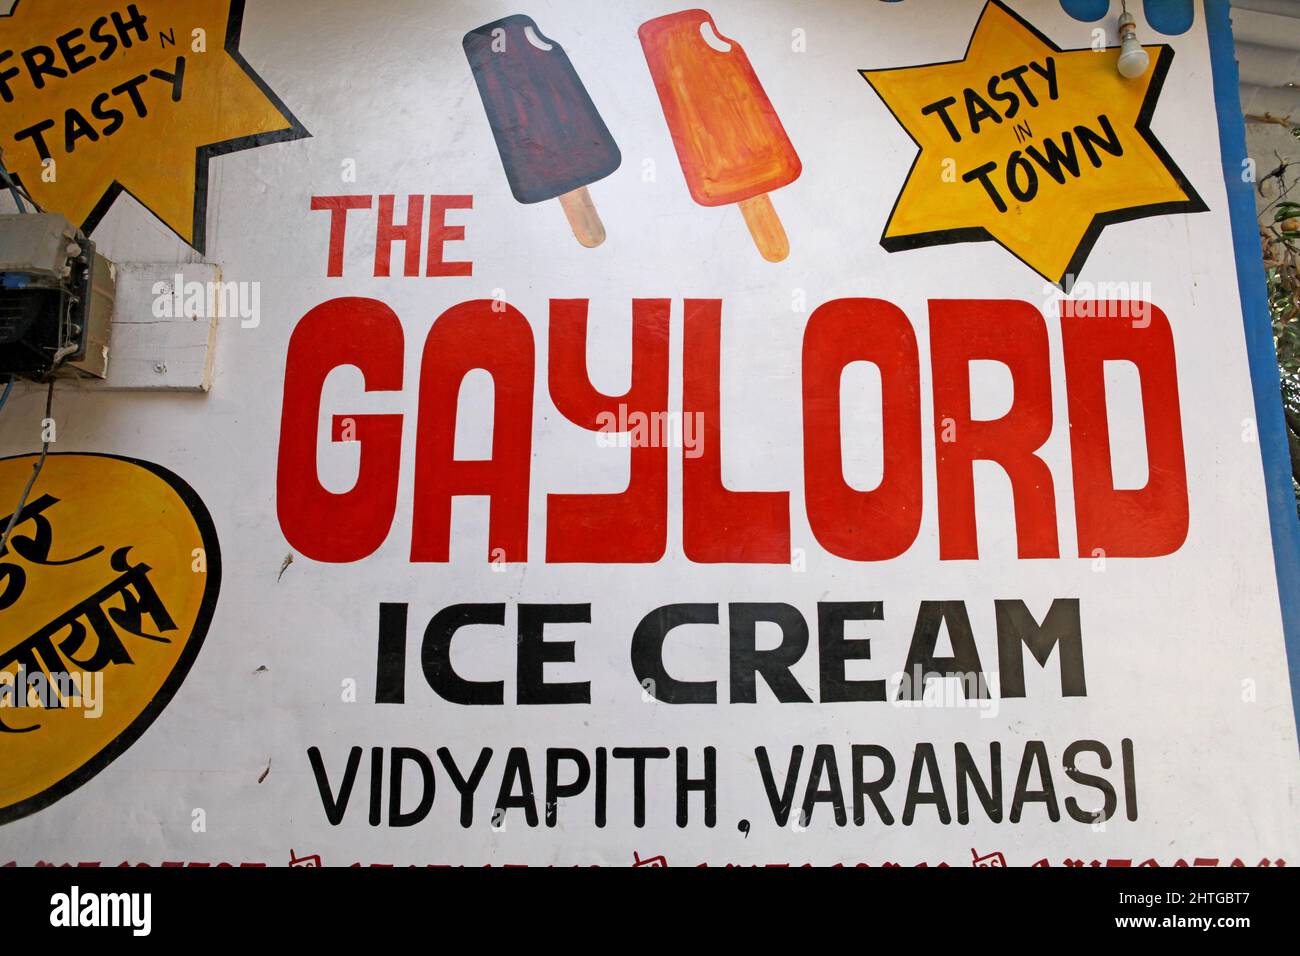 Sign for Gaylord ice cream in Varanasi, India Stock Photo